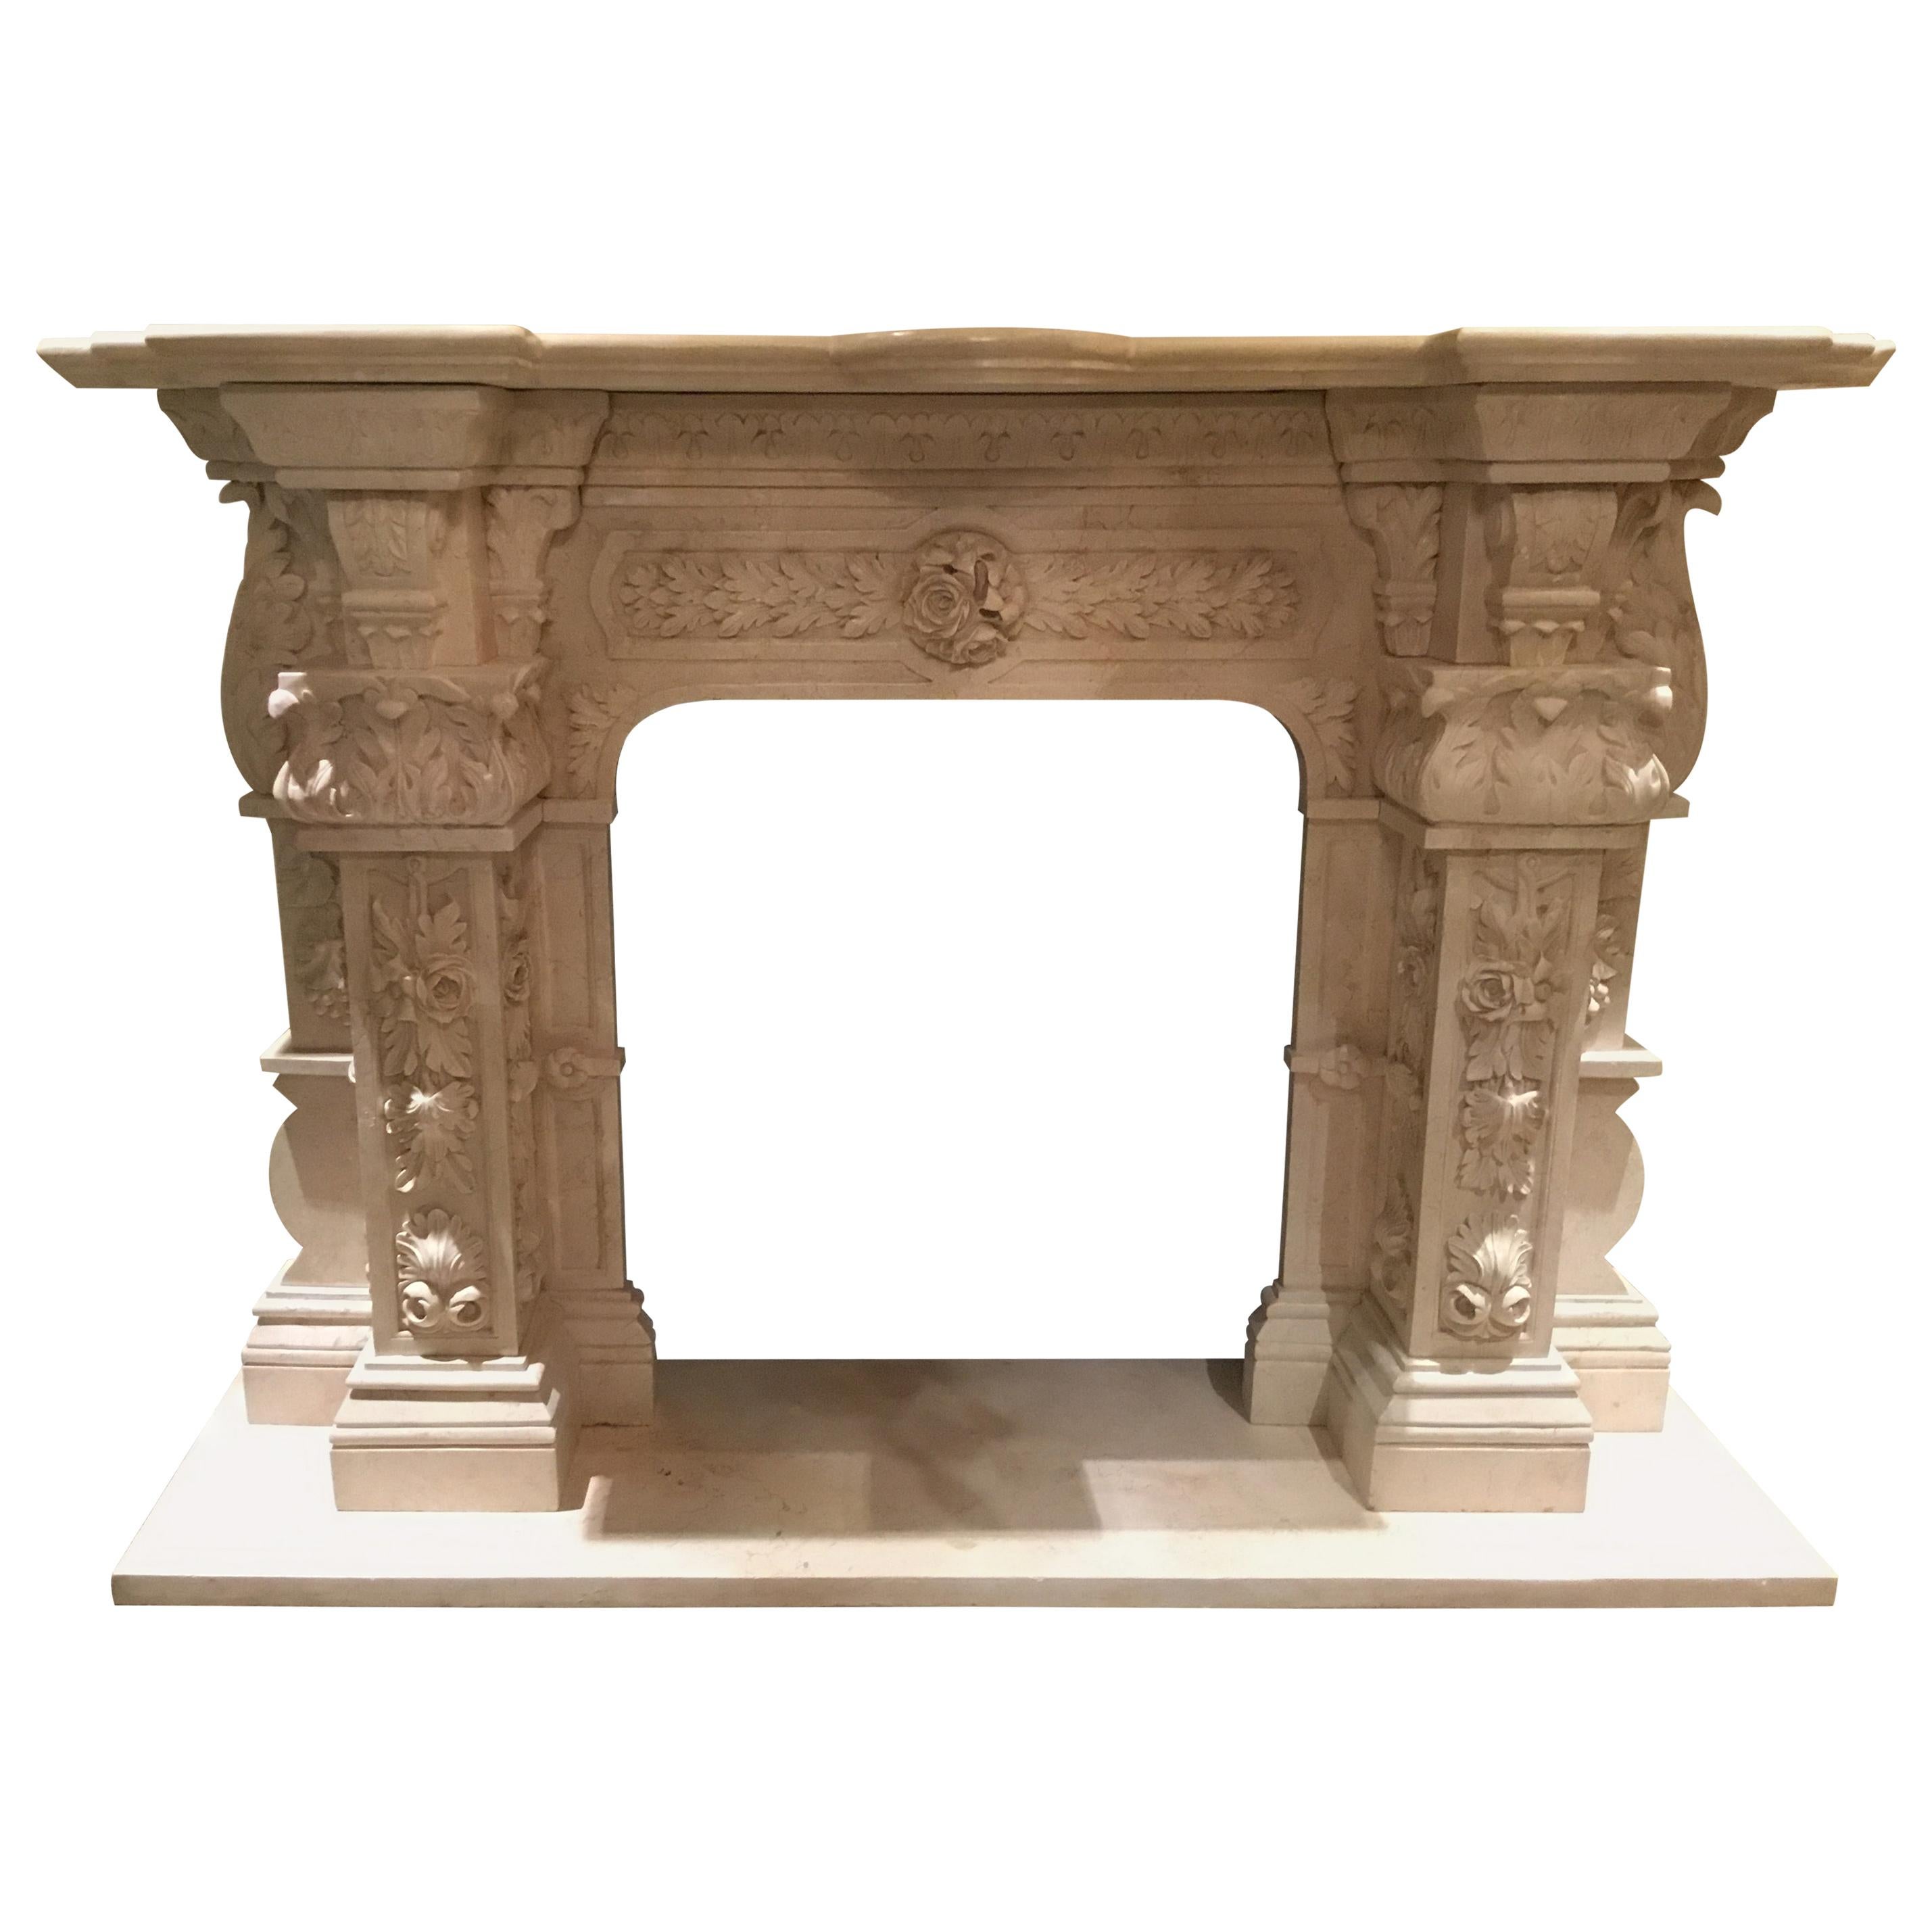 Large Cream Marble Mantel, French Style with Hand Carving with Floral/Foliate